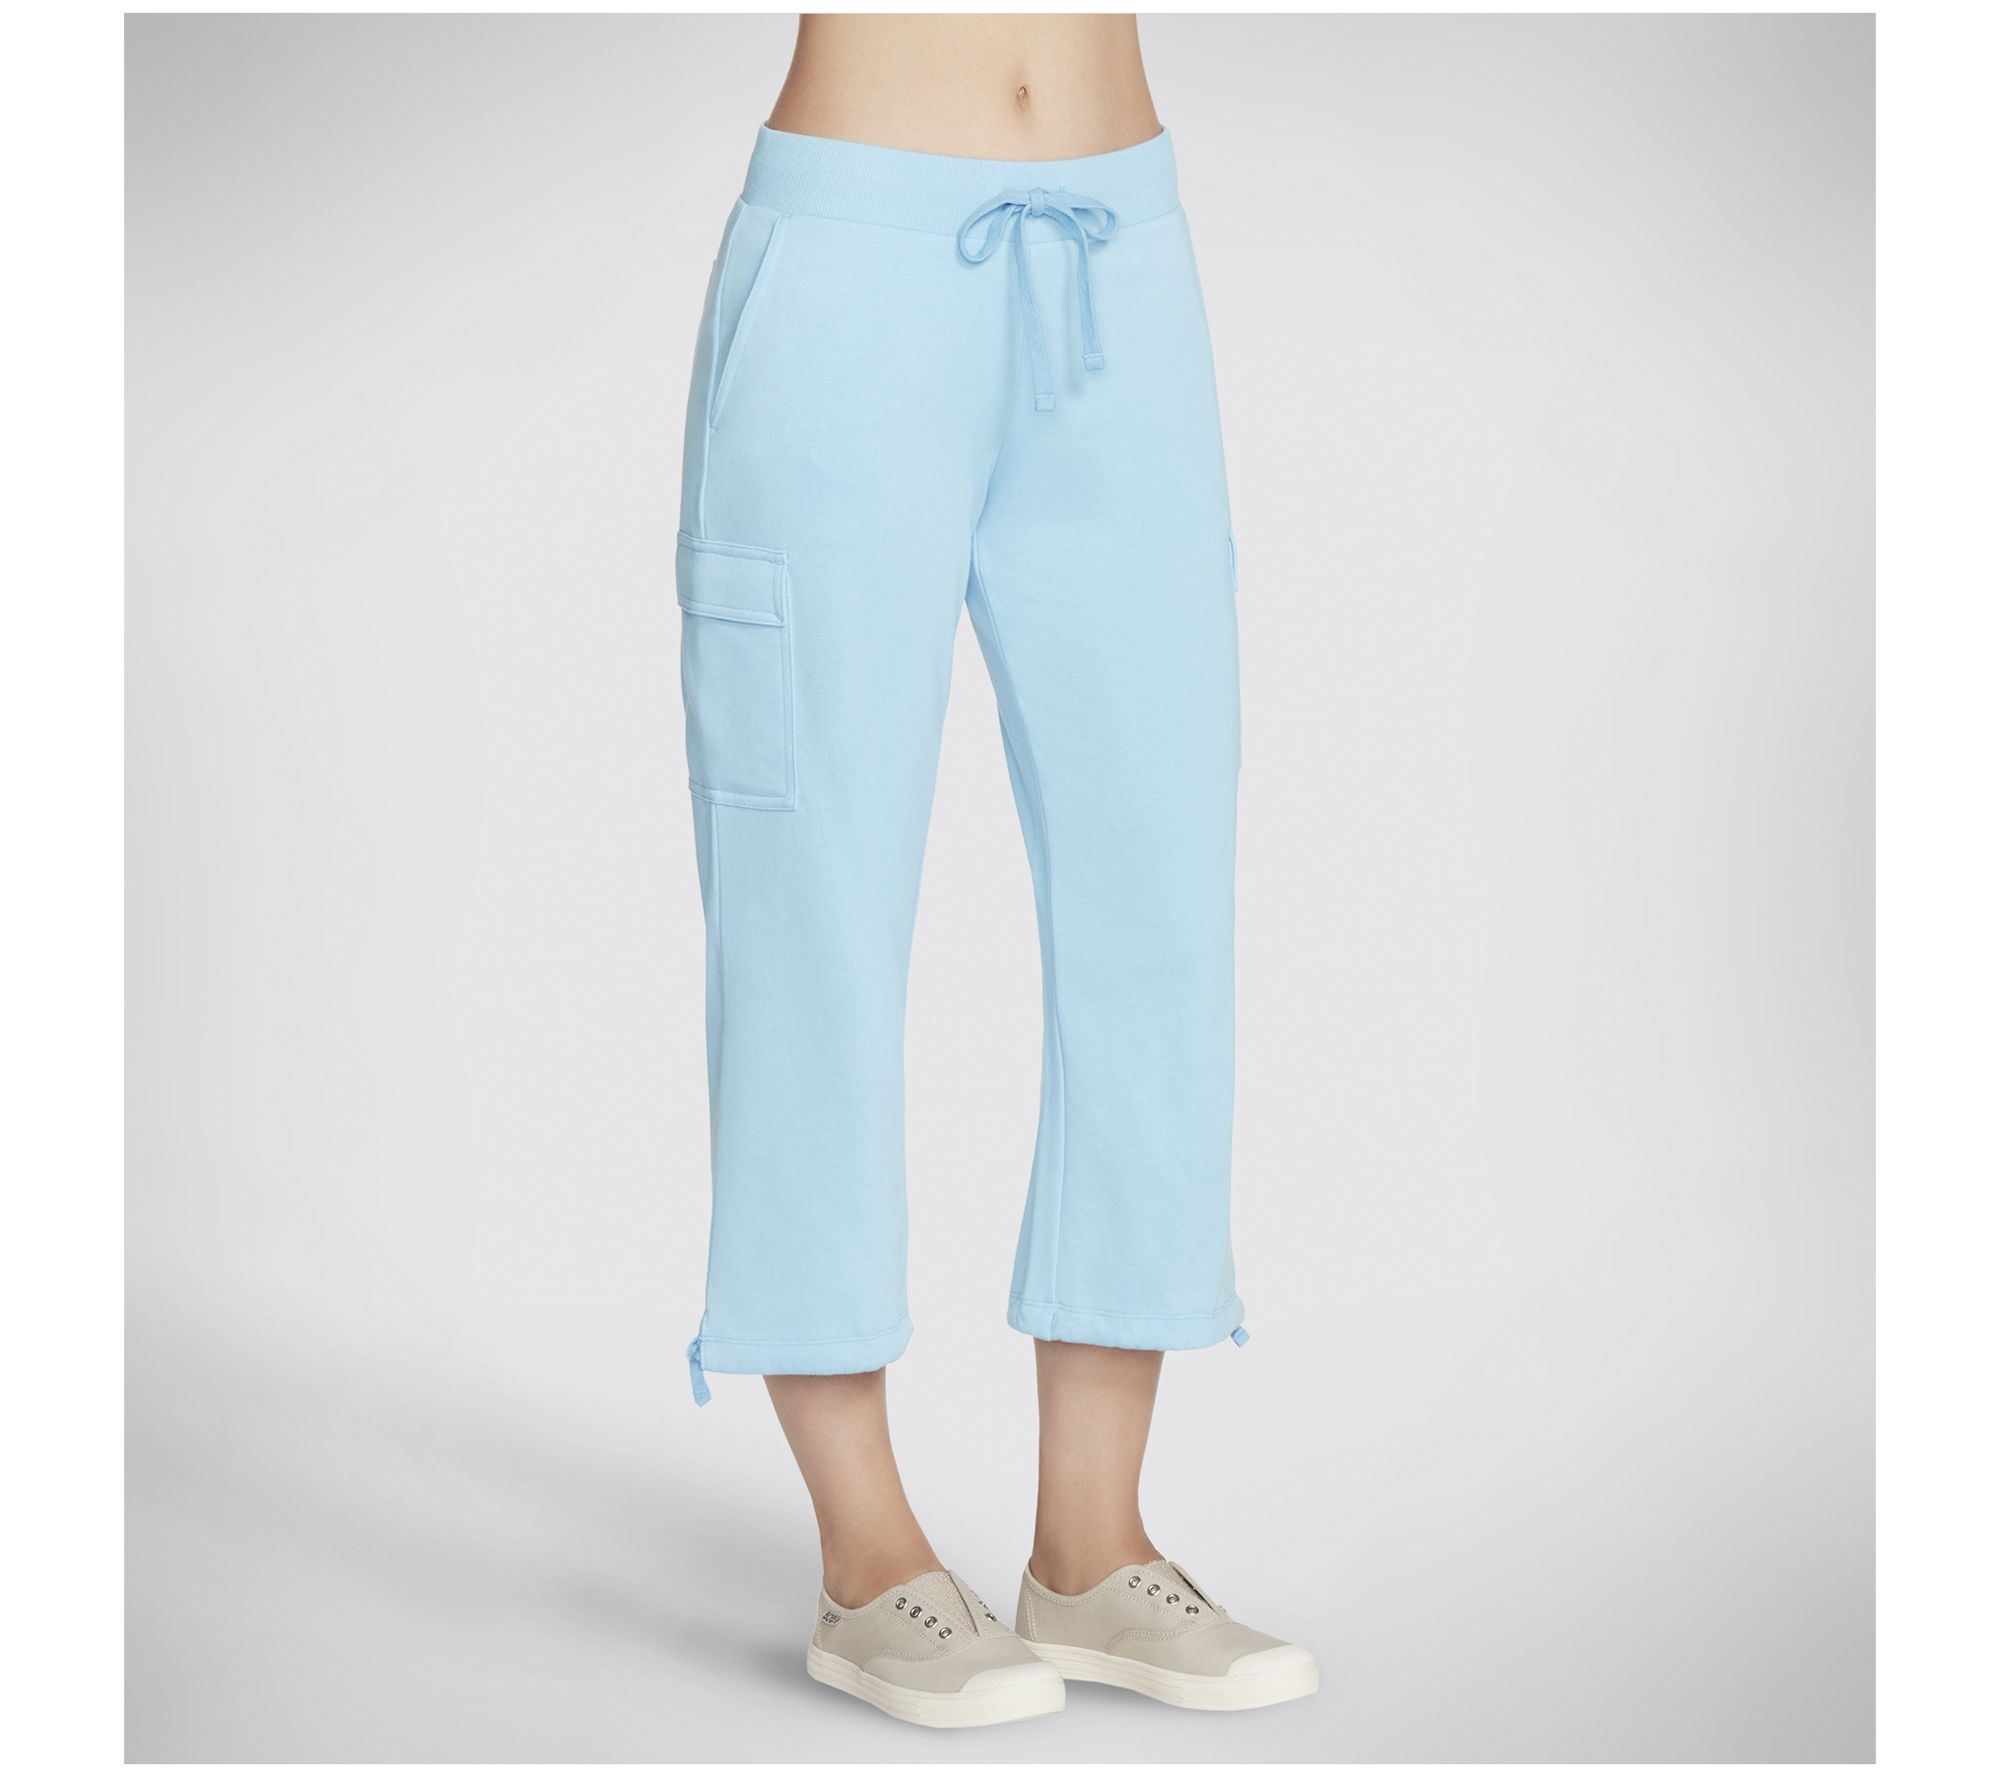 Skechers Capri and cropped pants for Women